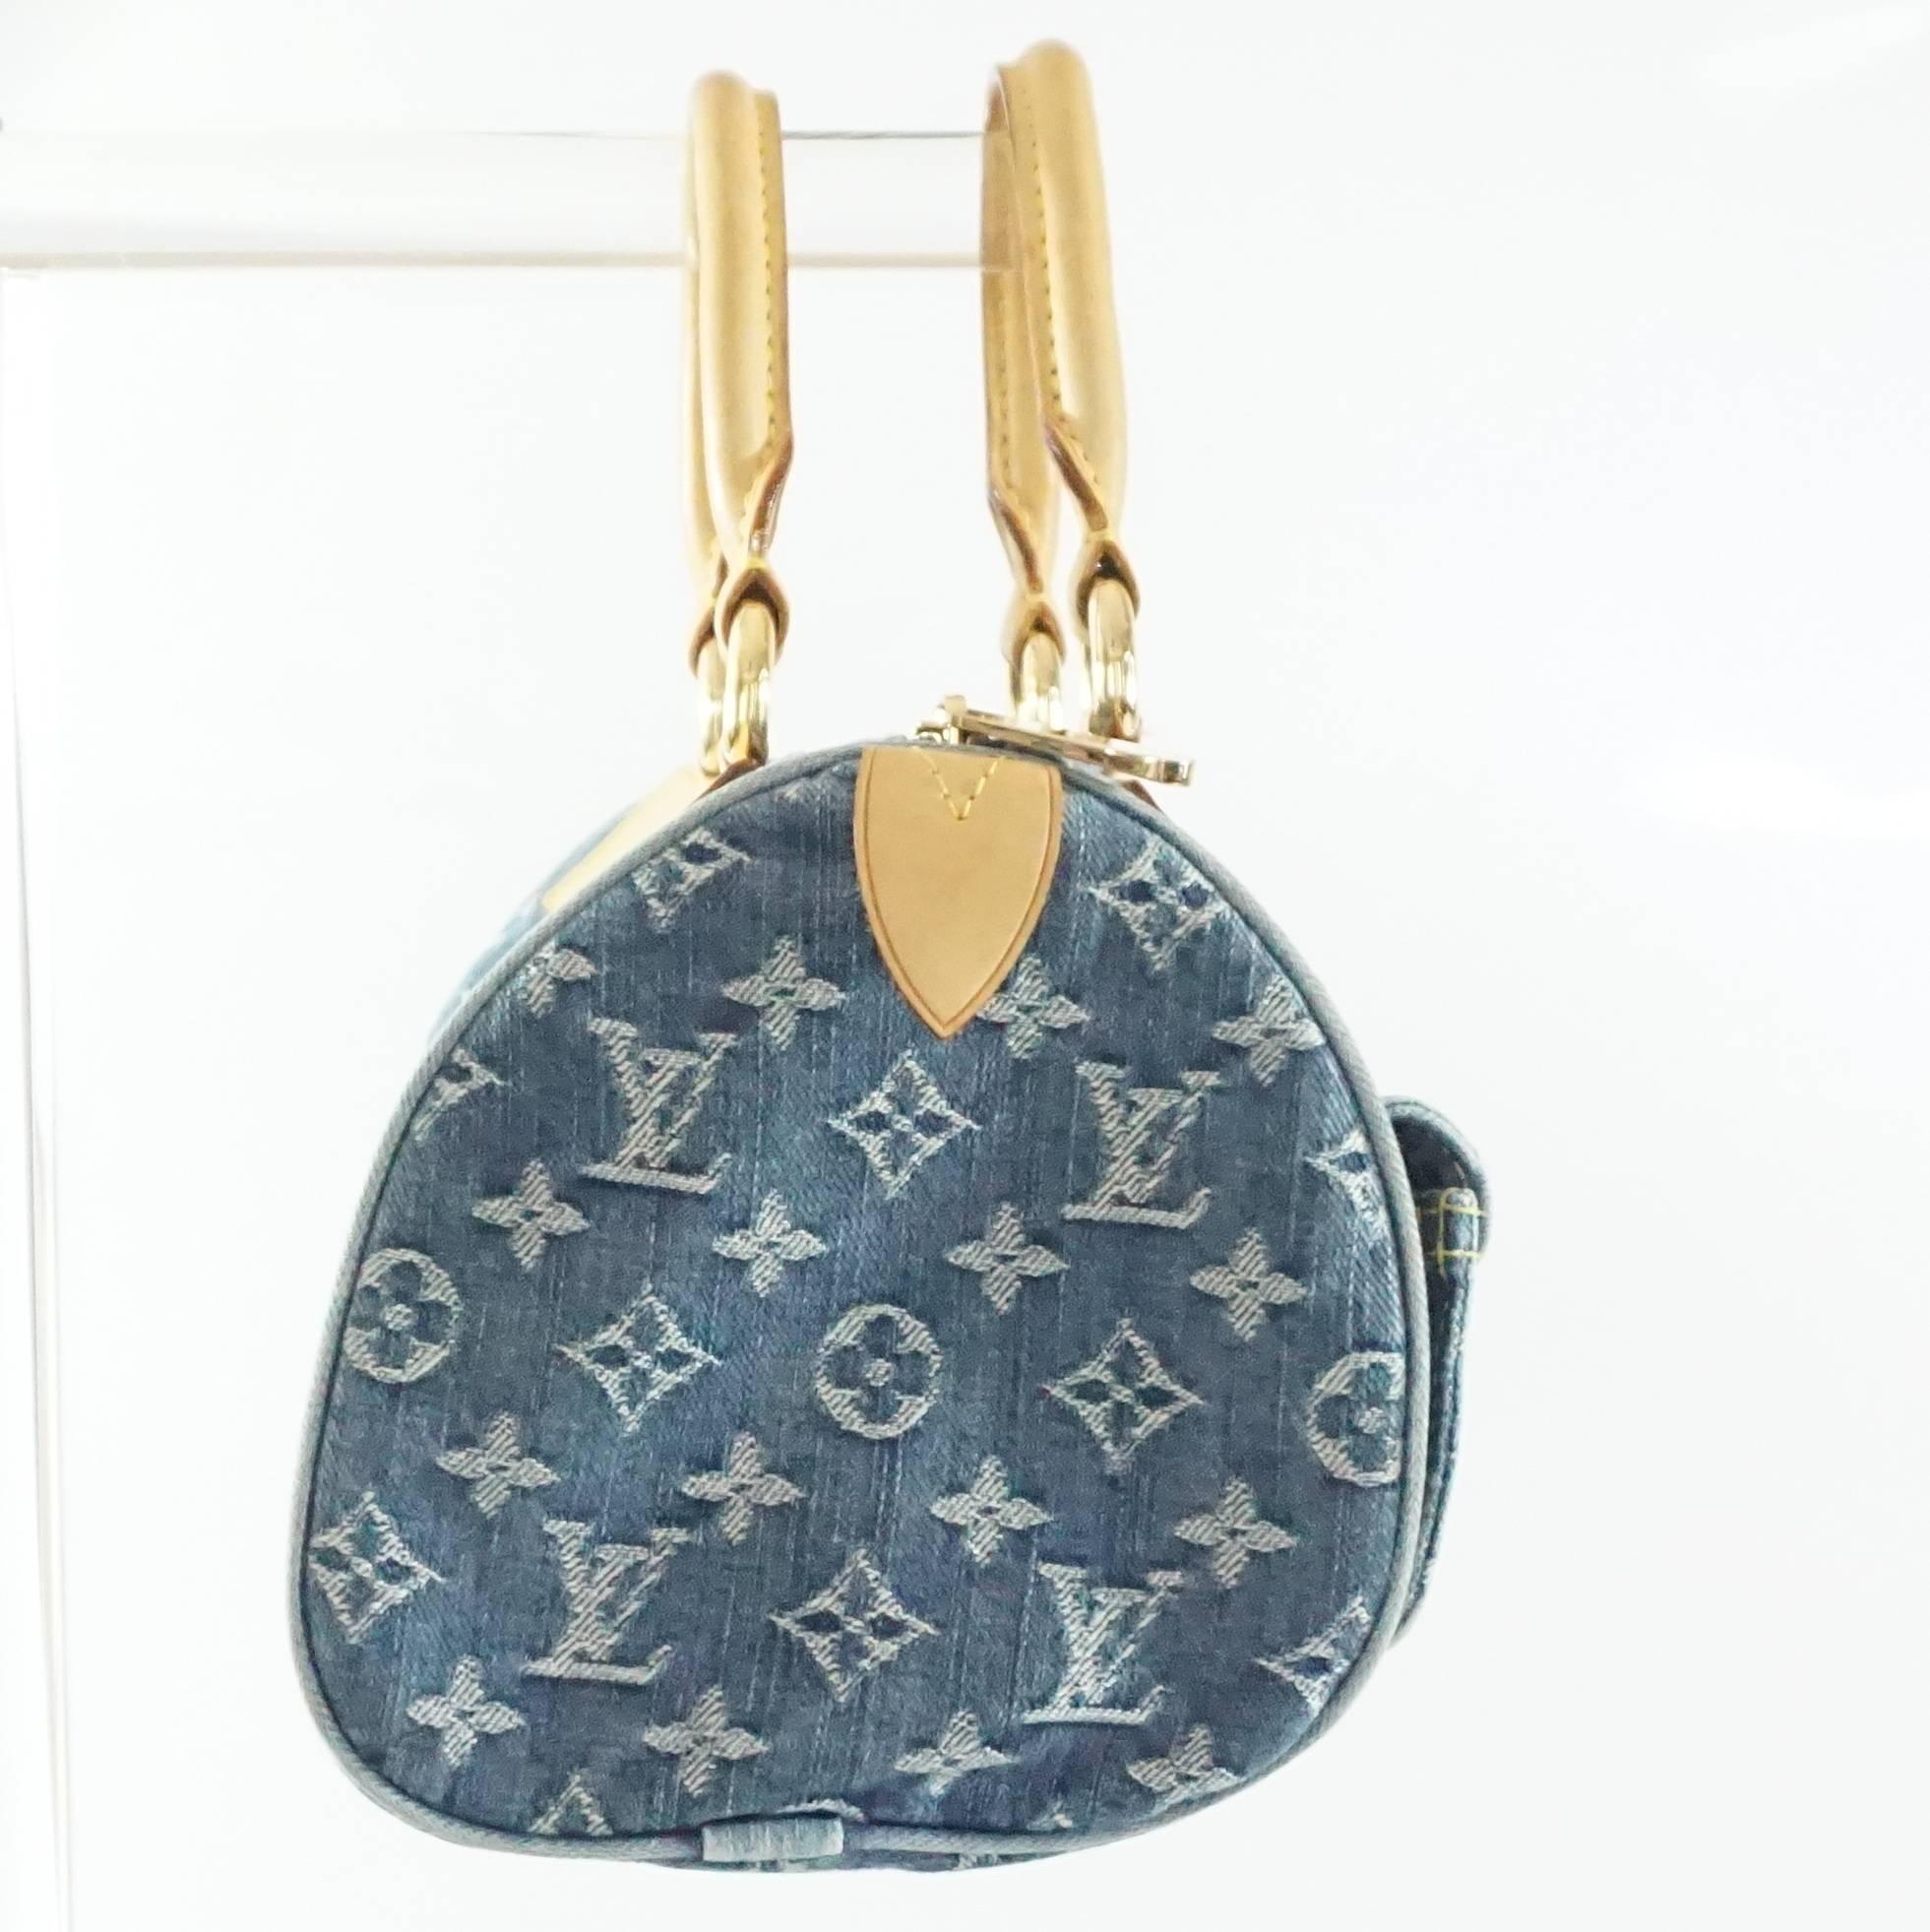 This Louis Vuitton blue jean bag has a monogram print all over with luggage leather detailing. This top handle bag has 2 front exterior pockets, 1 exterior zip pocket, and 1 small interior open pocket. The piece is in fair condition with some small